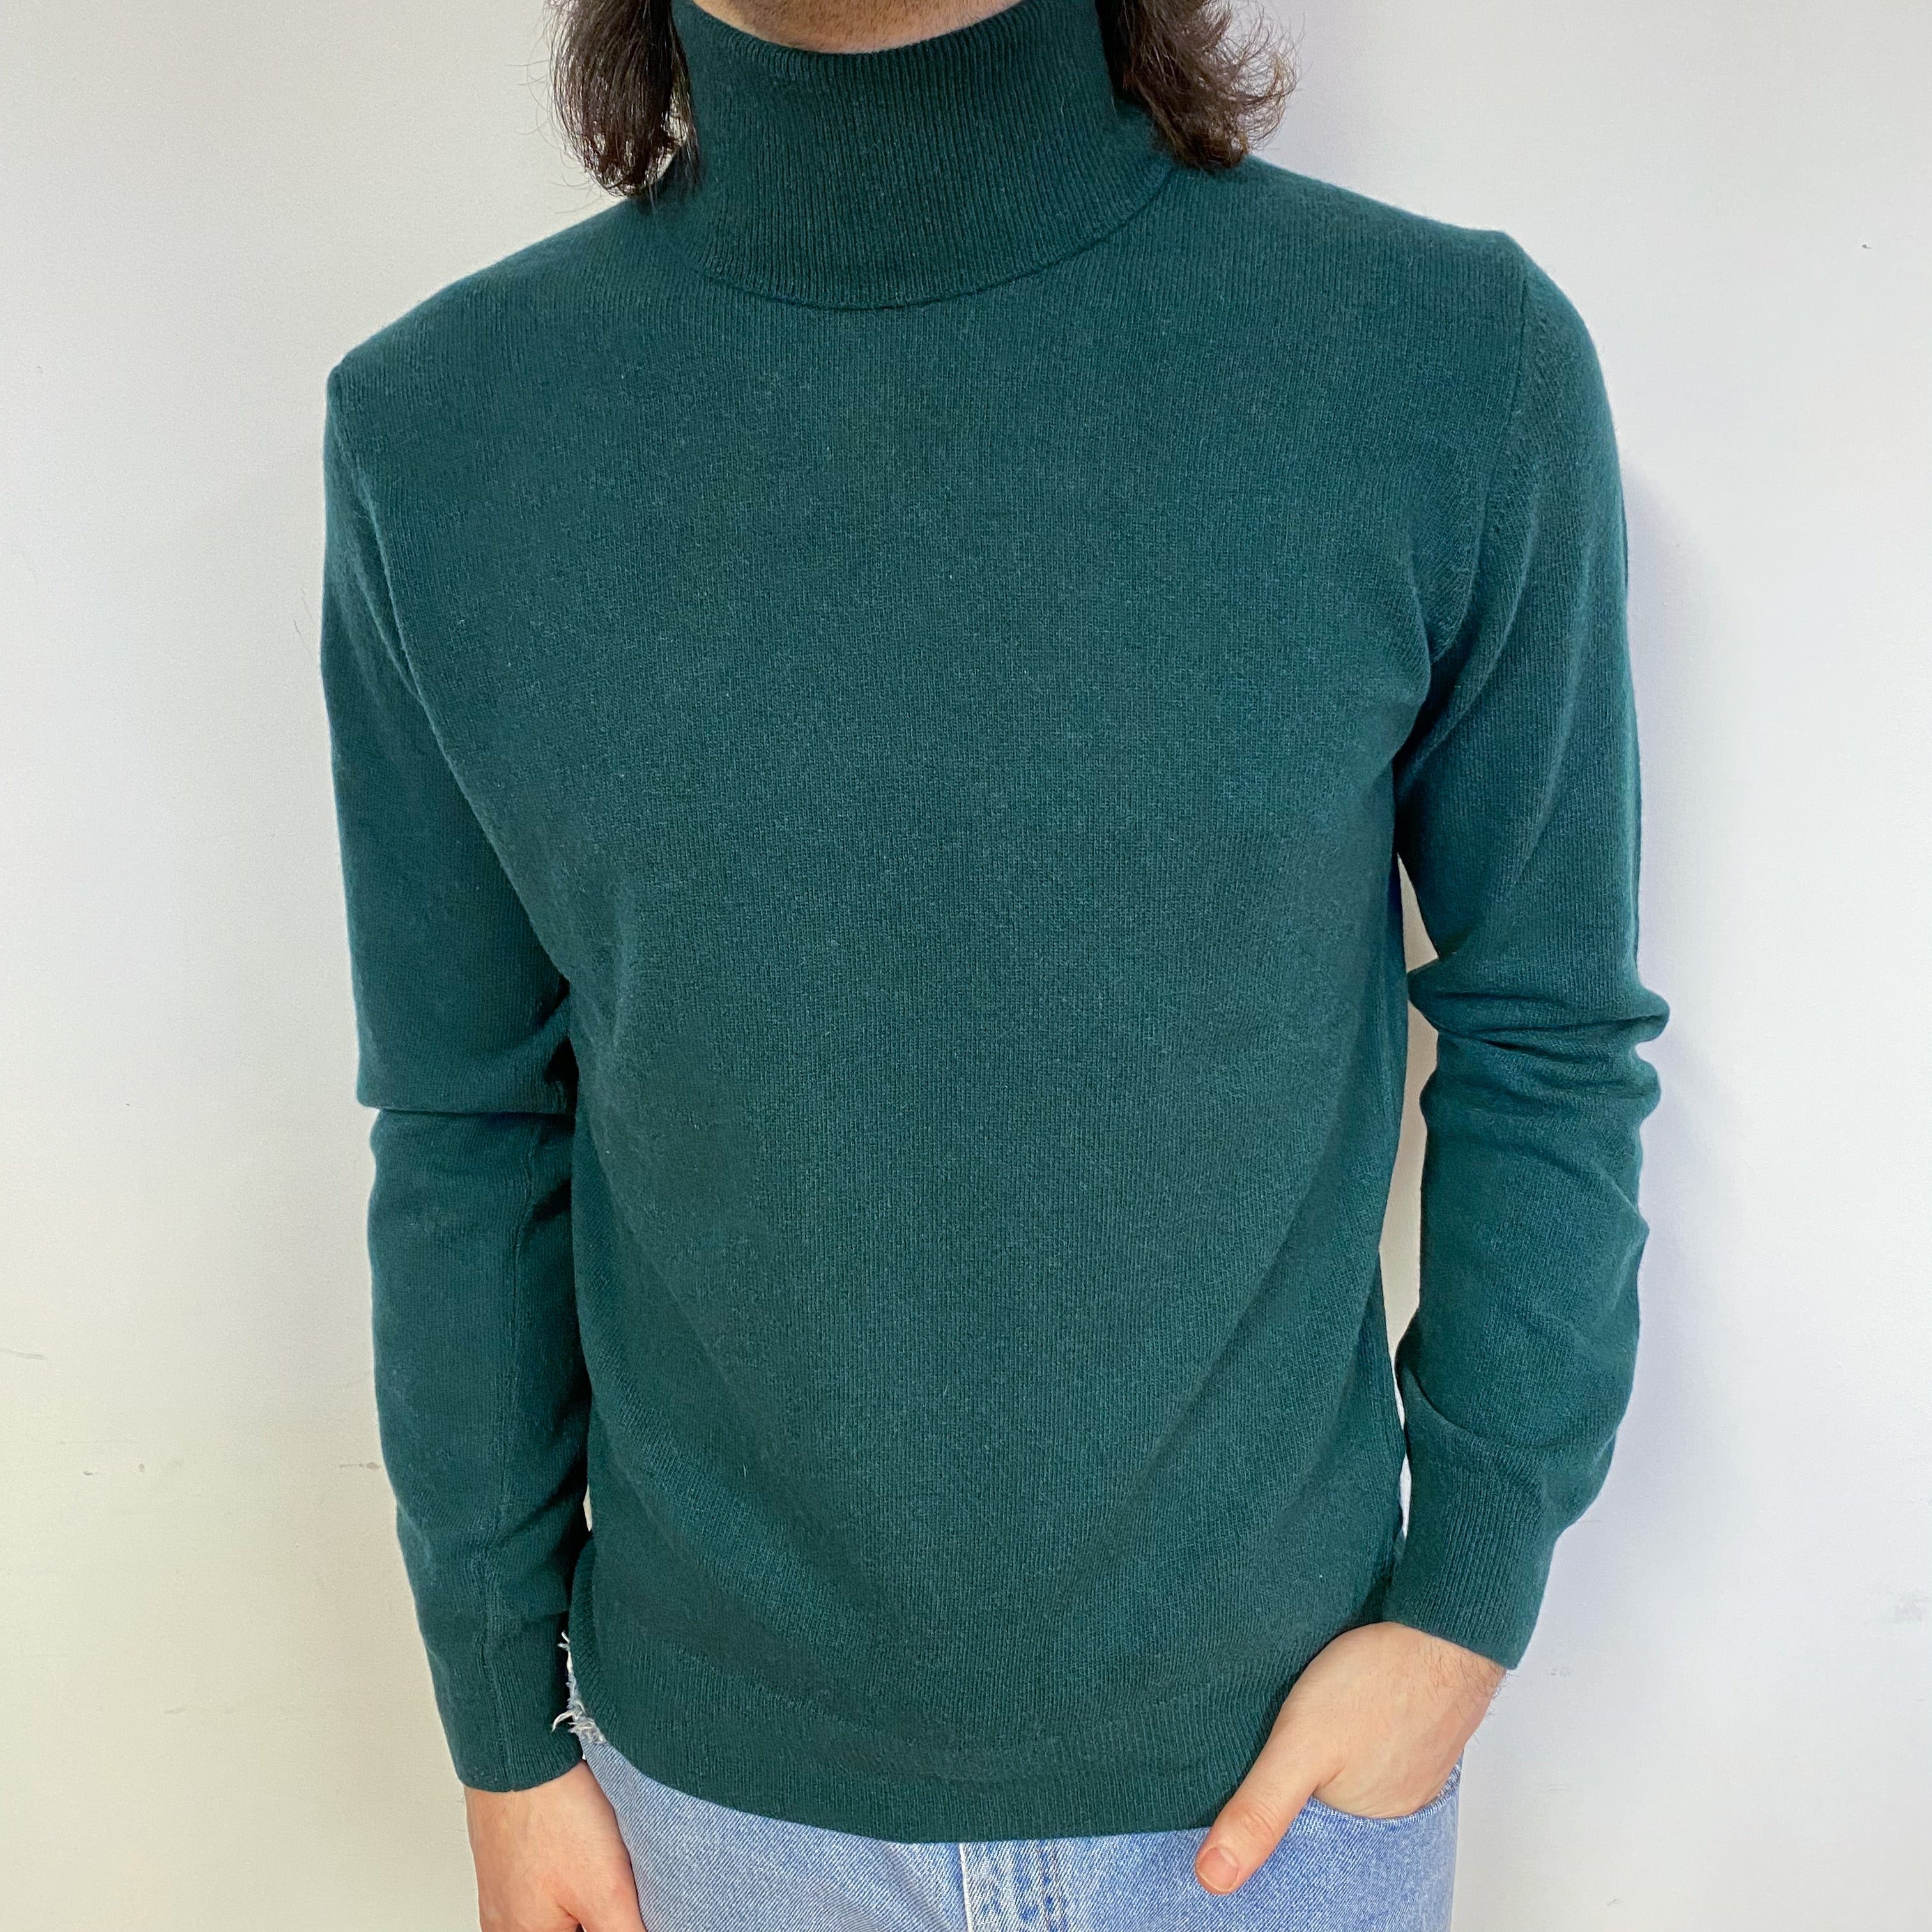 New Italian Forest Green Unisex Polo Neck Jumper Small-Extra Large